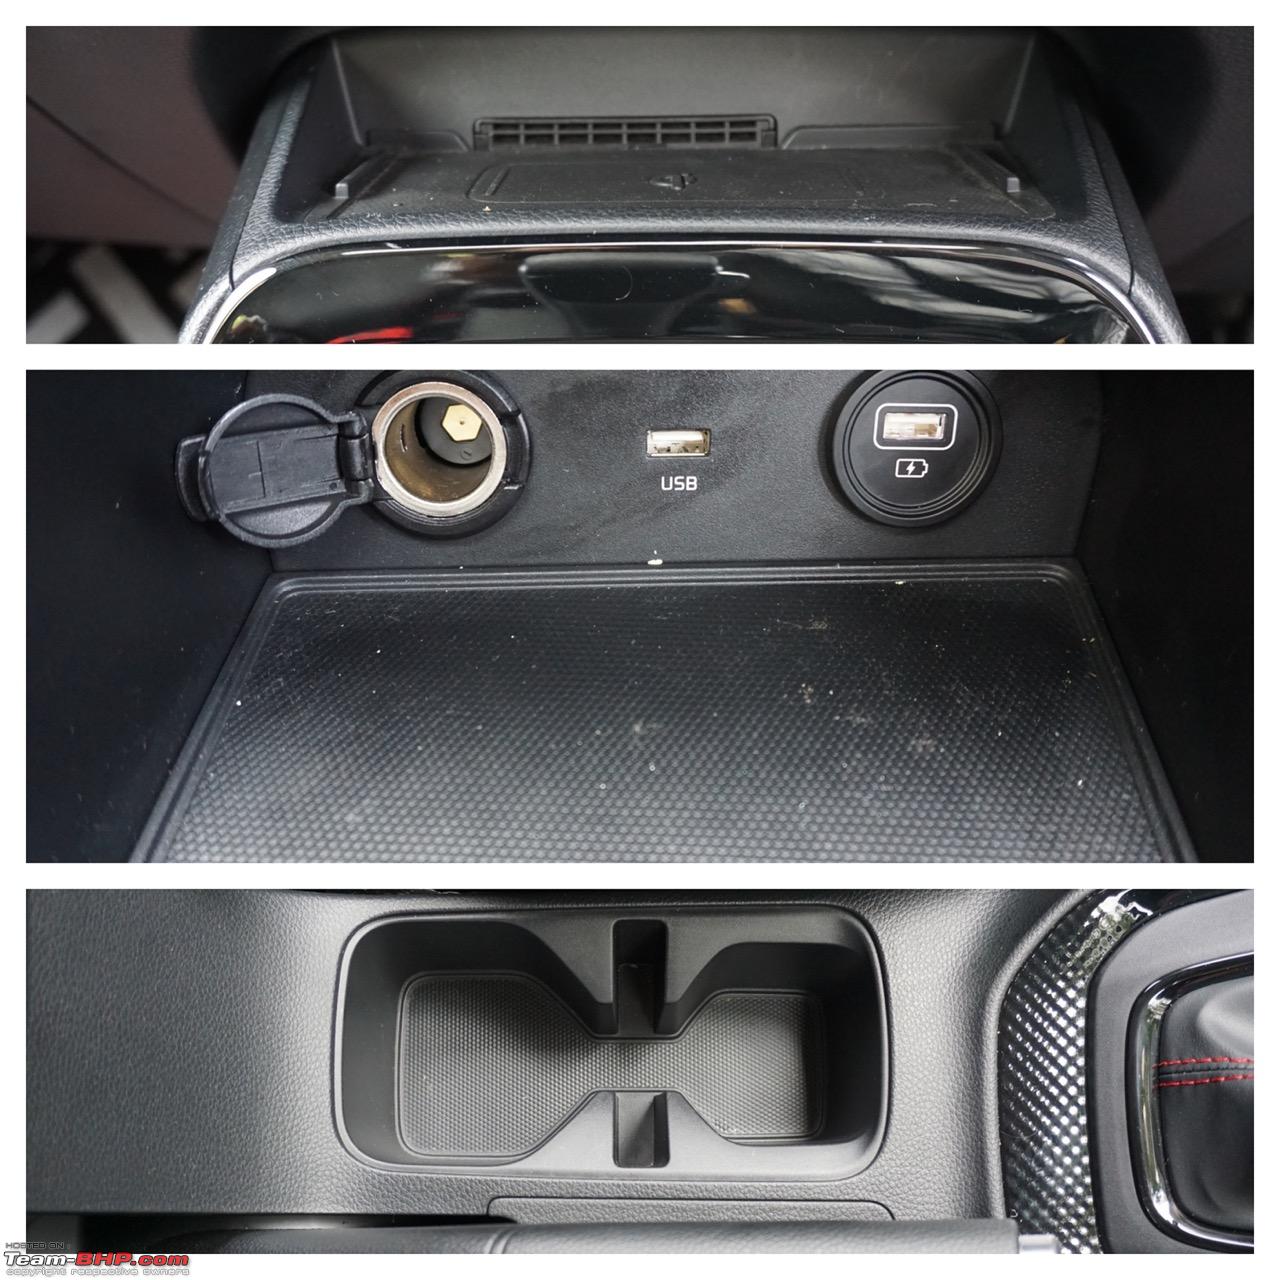 2010 Fiesta Mk7. How do I connect my phone with Bluetooth? I've